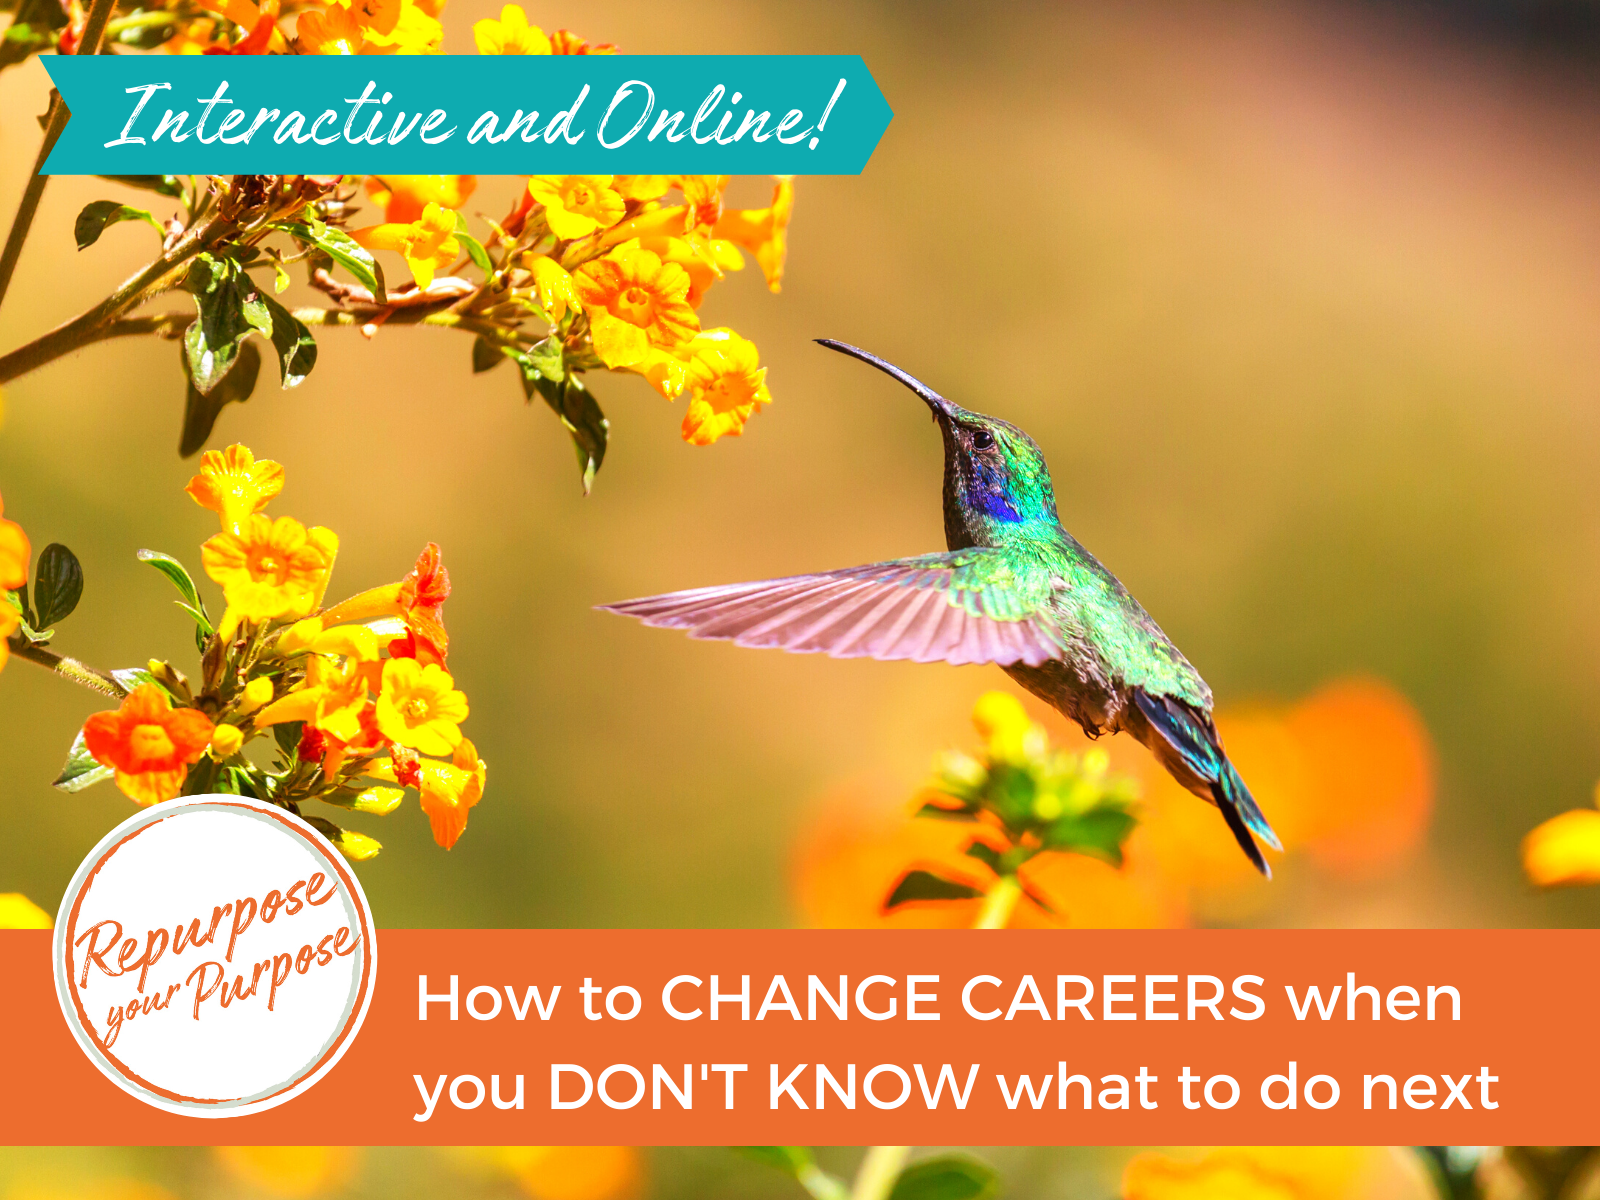 How To Change Careers When You Don't Know What To Do Next